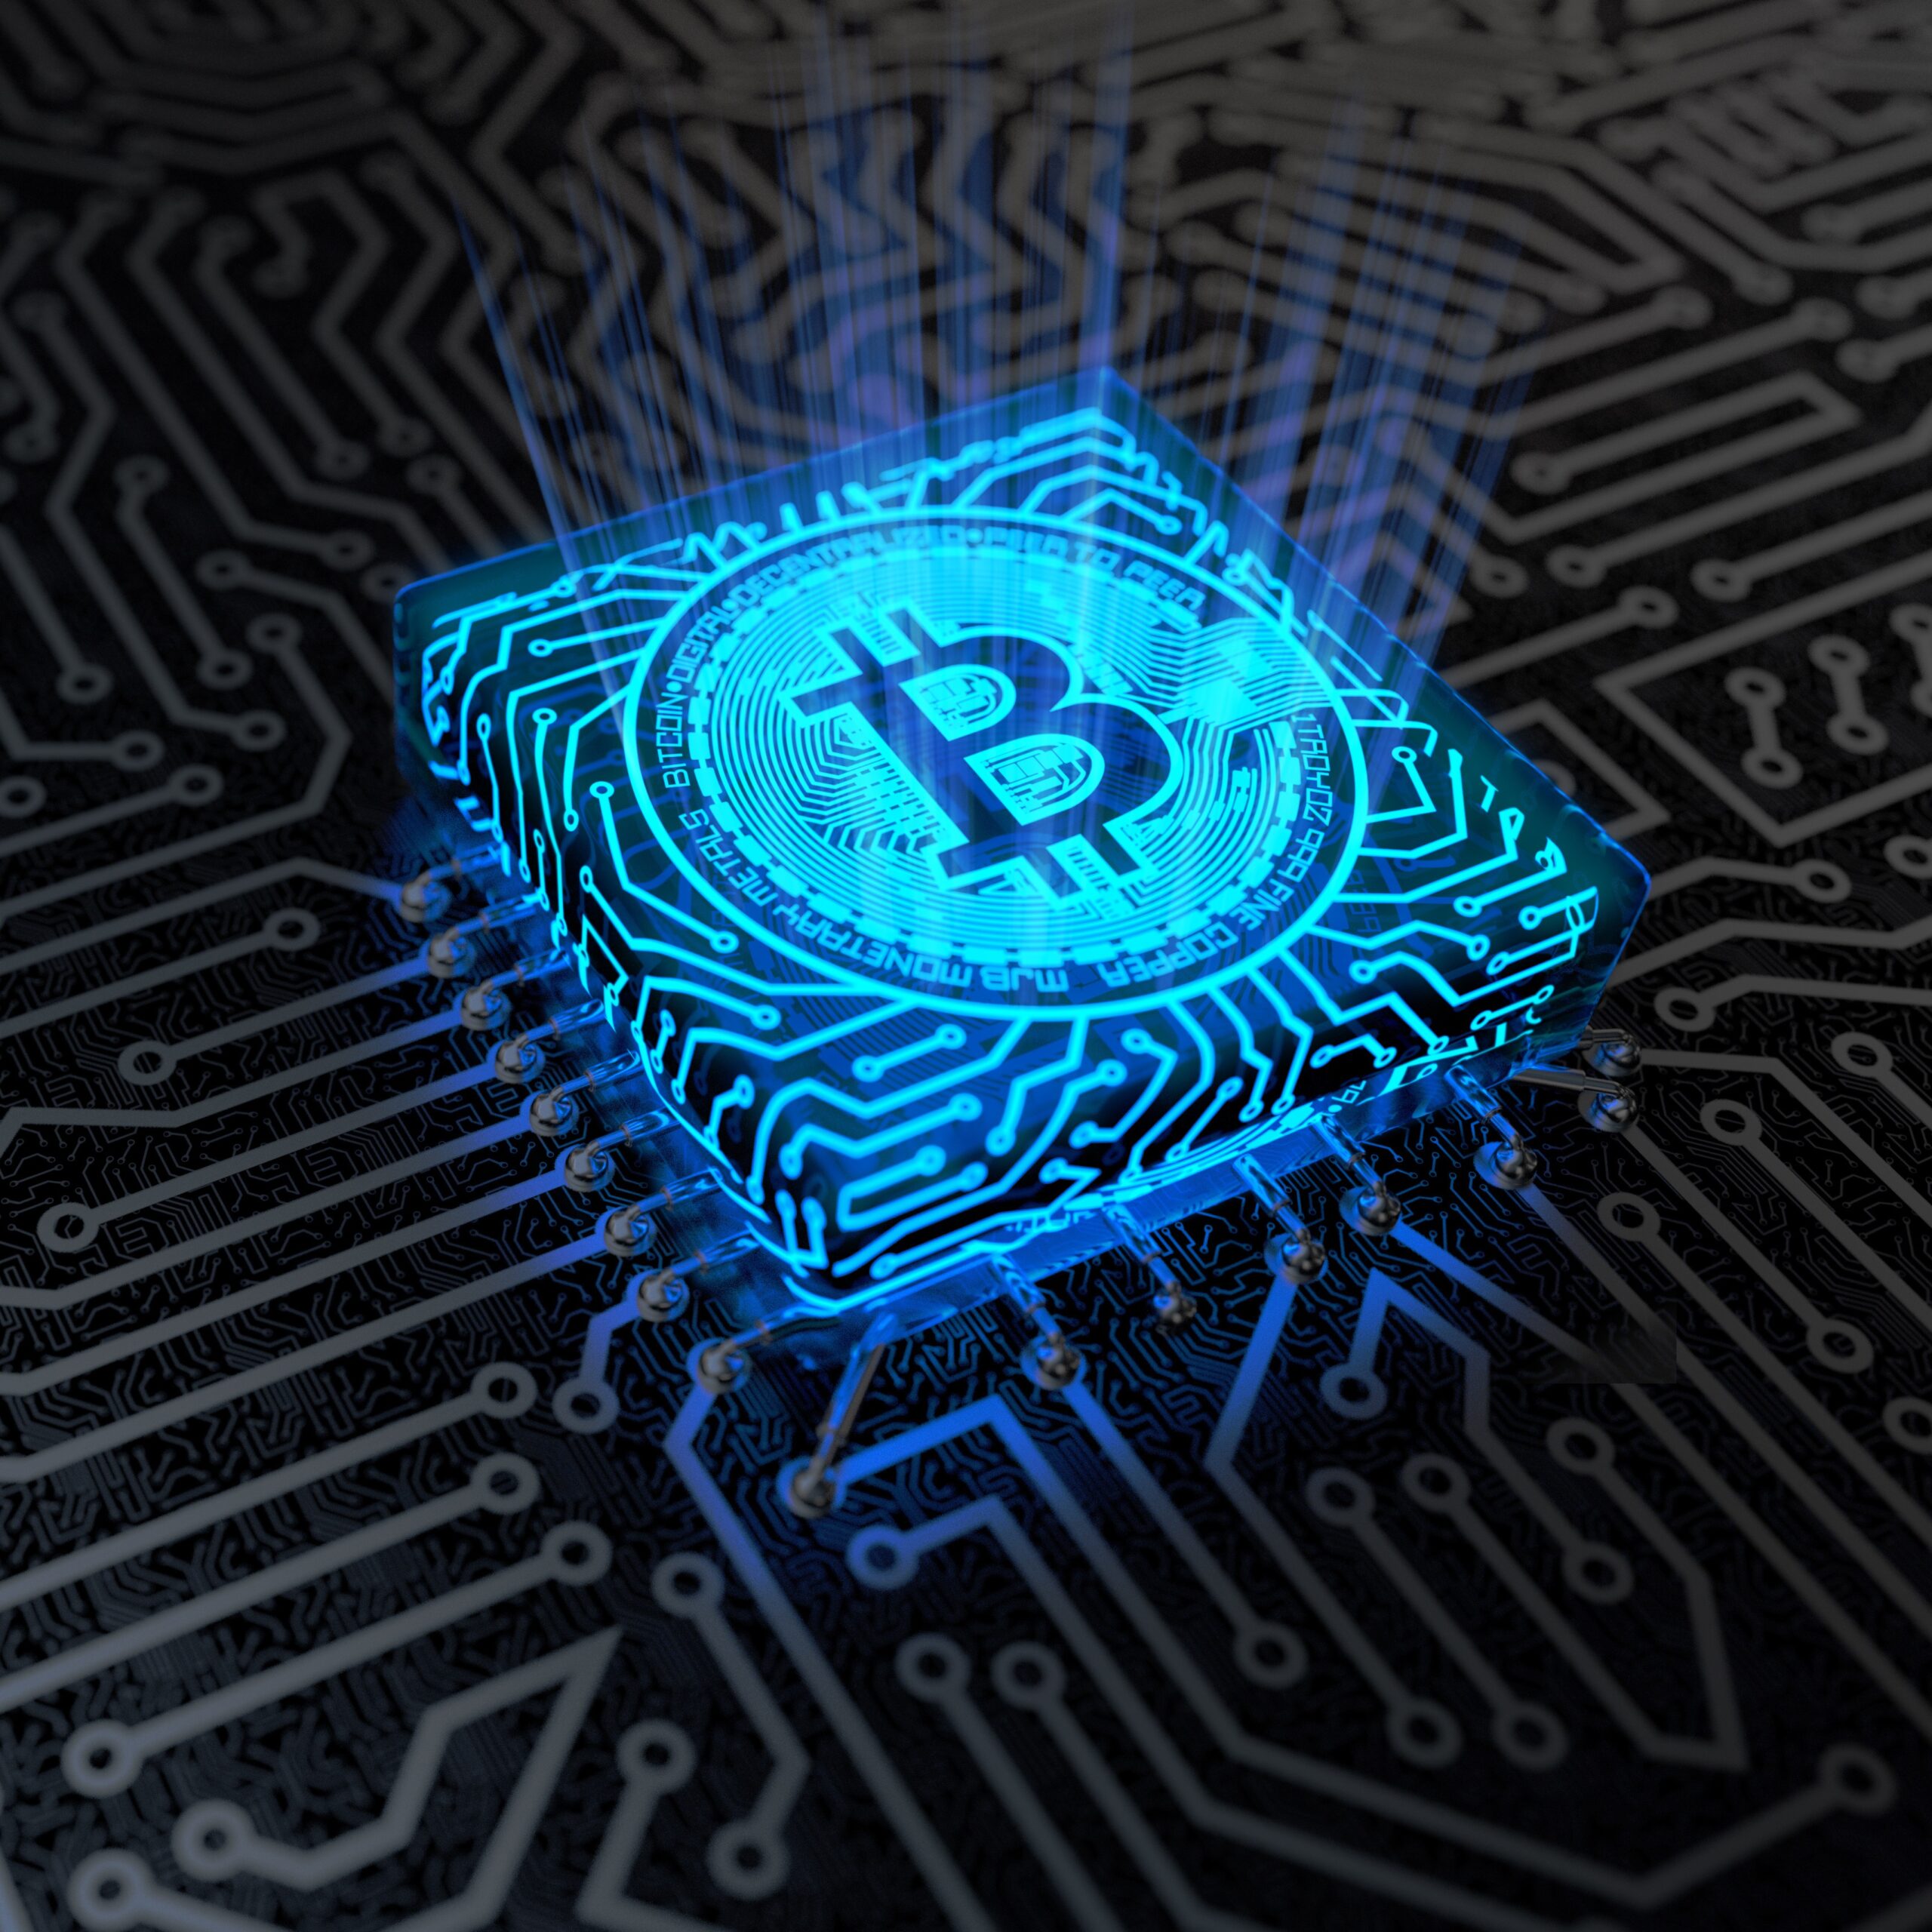 Bitcoin image superimposed on microchip on printed circuit board.